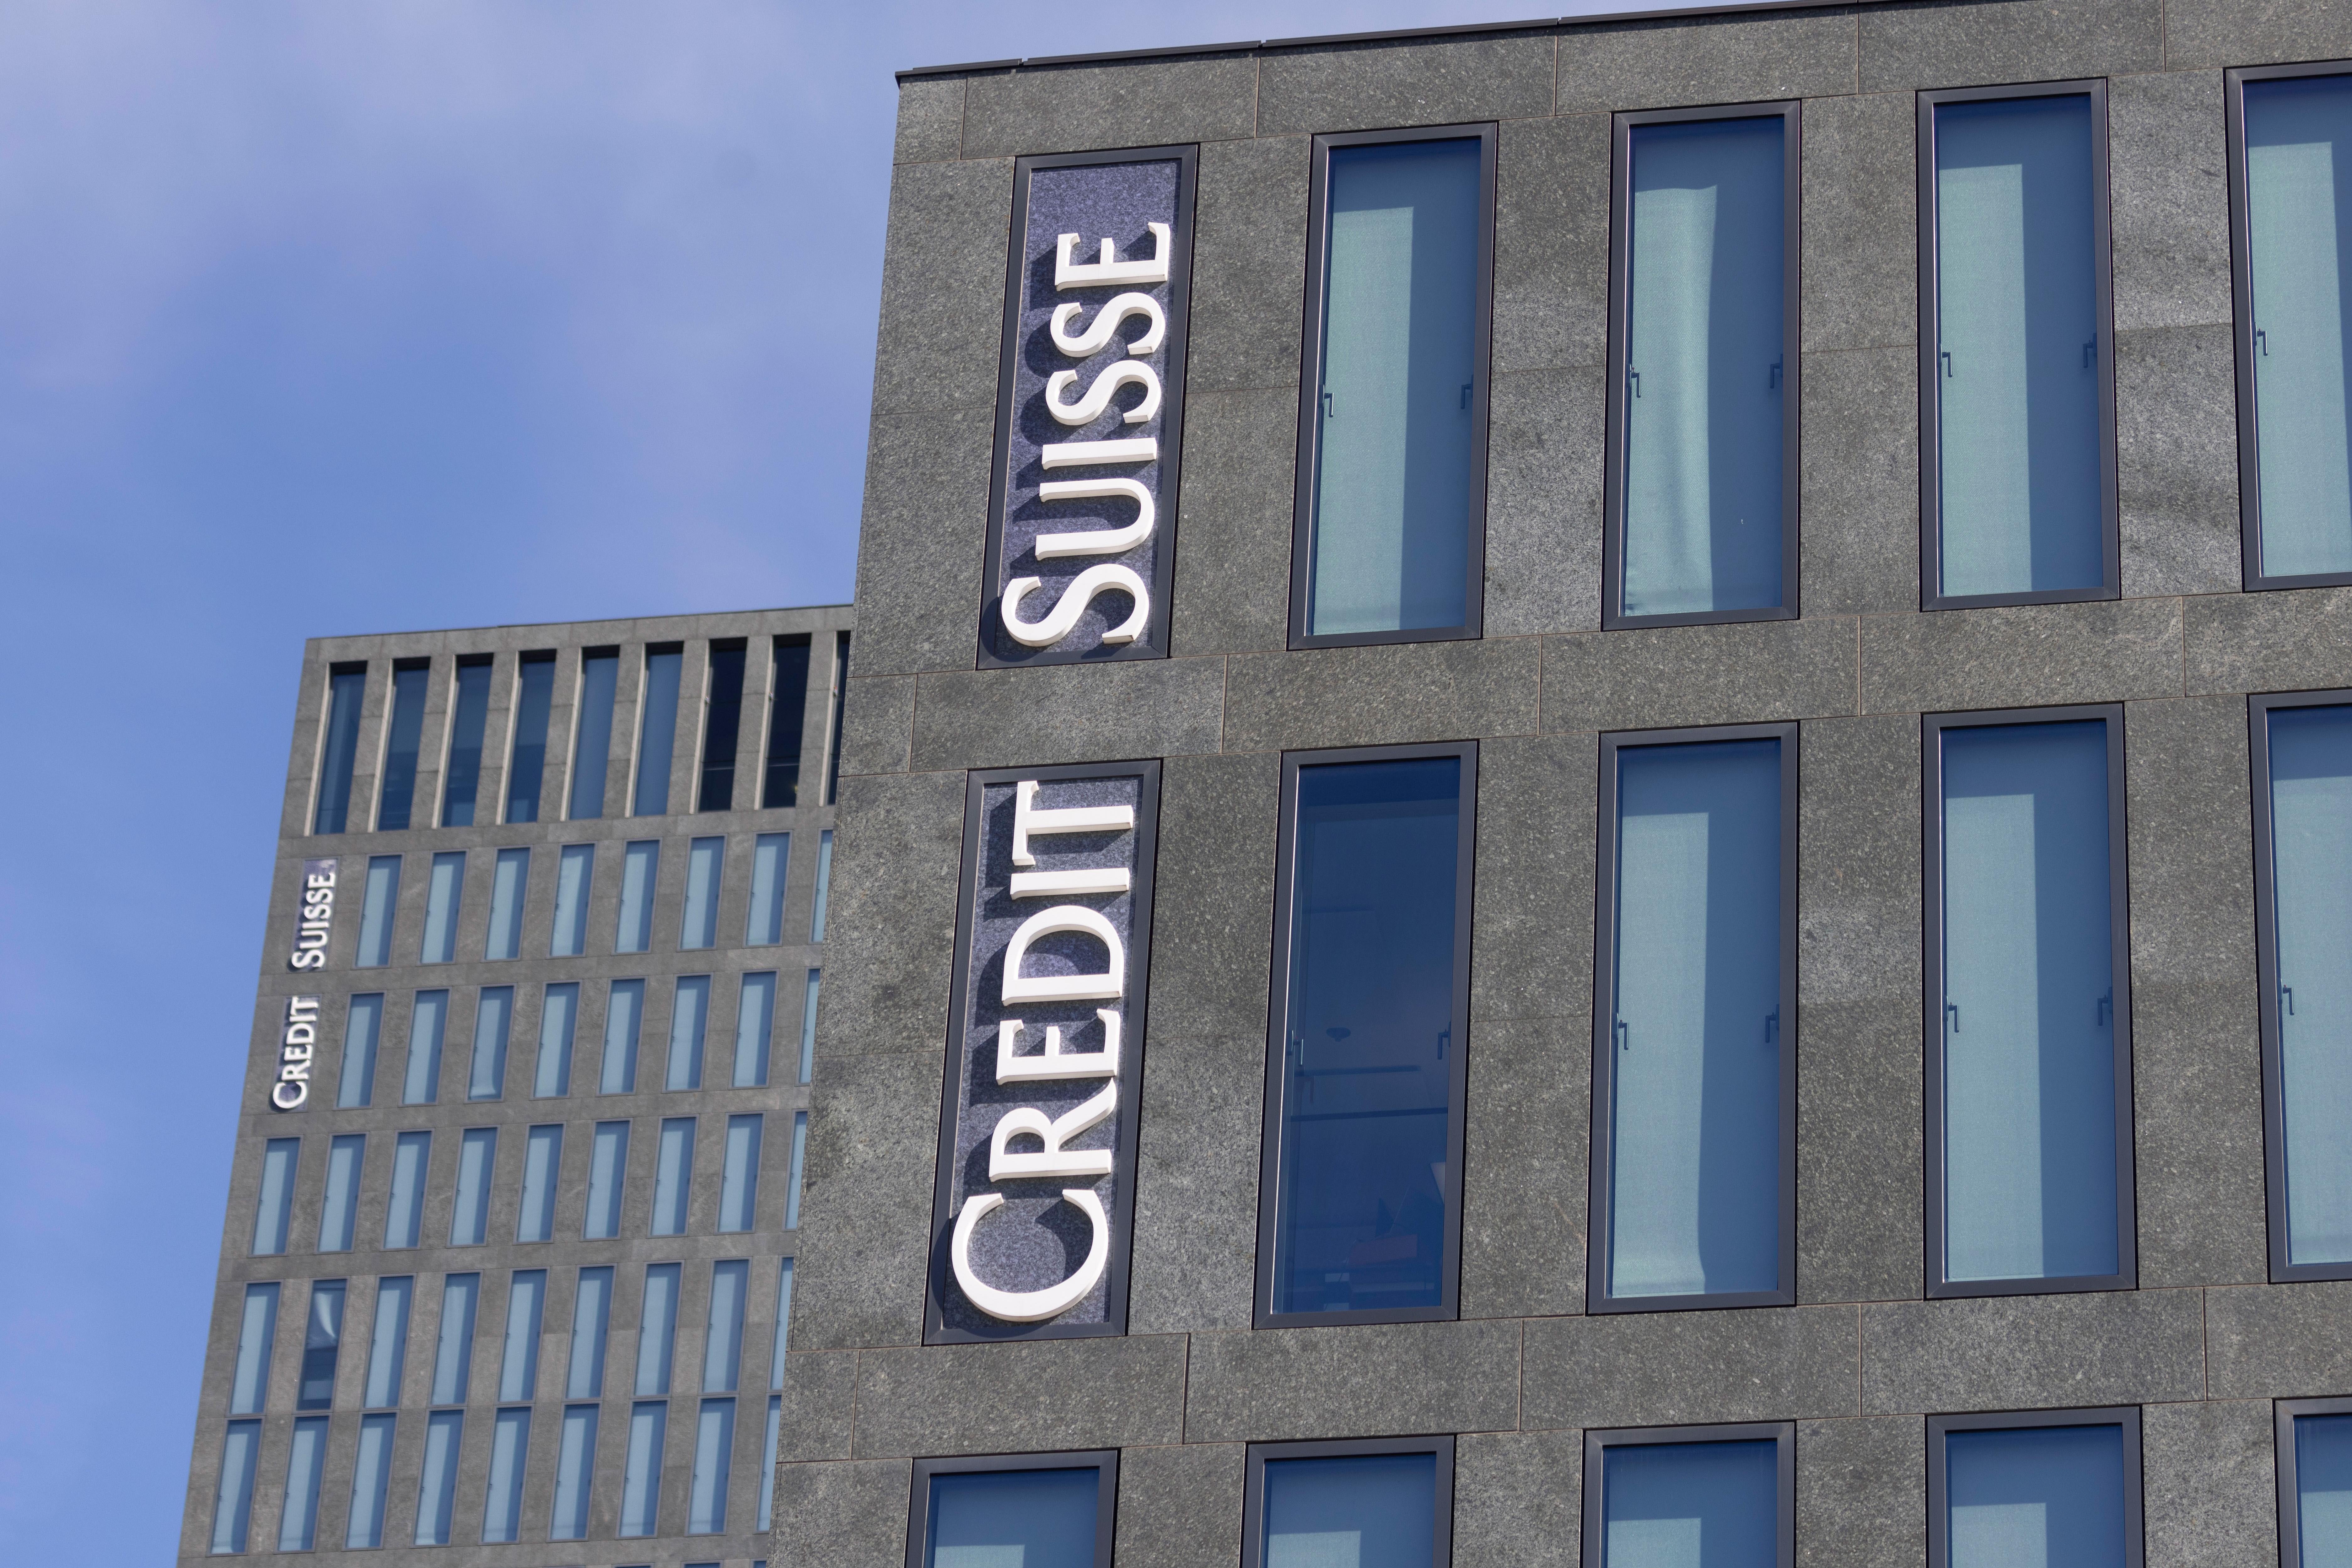 The Credit Suisse logo is displayed on a tall concrete building that has several rectangular windows.